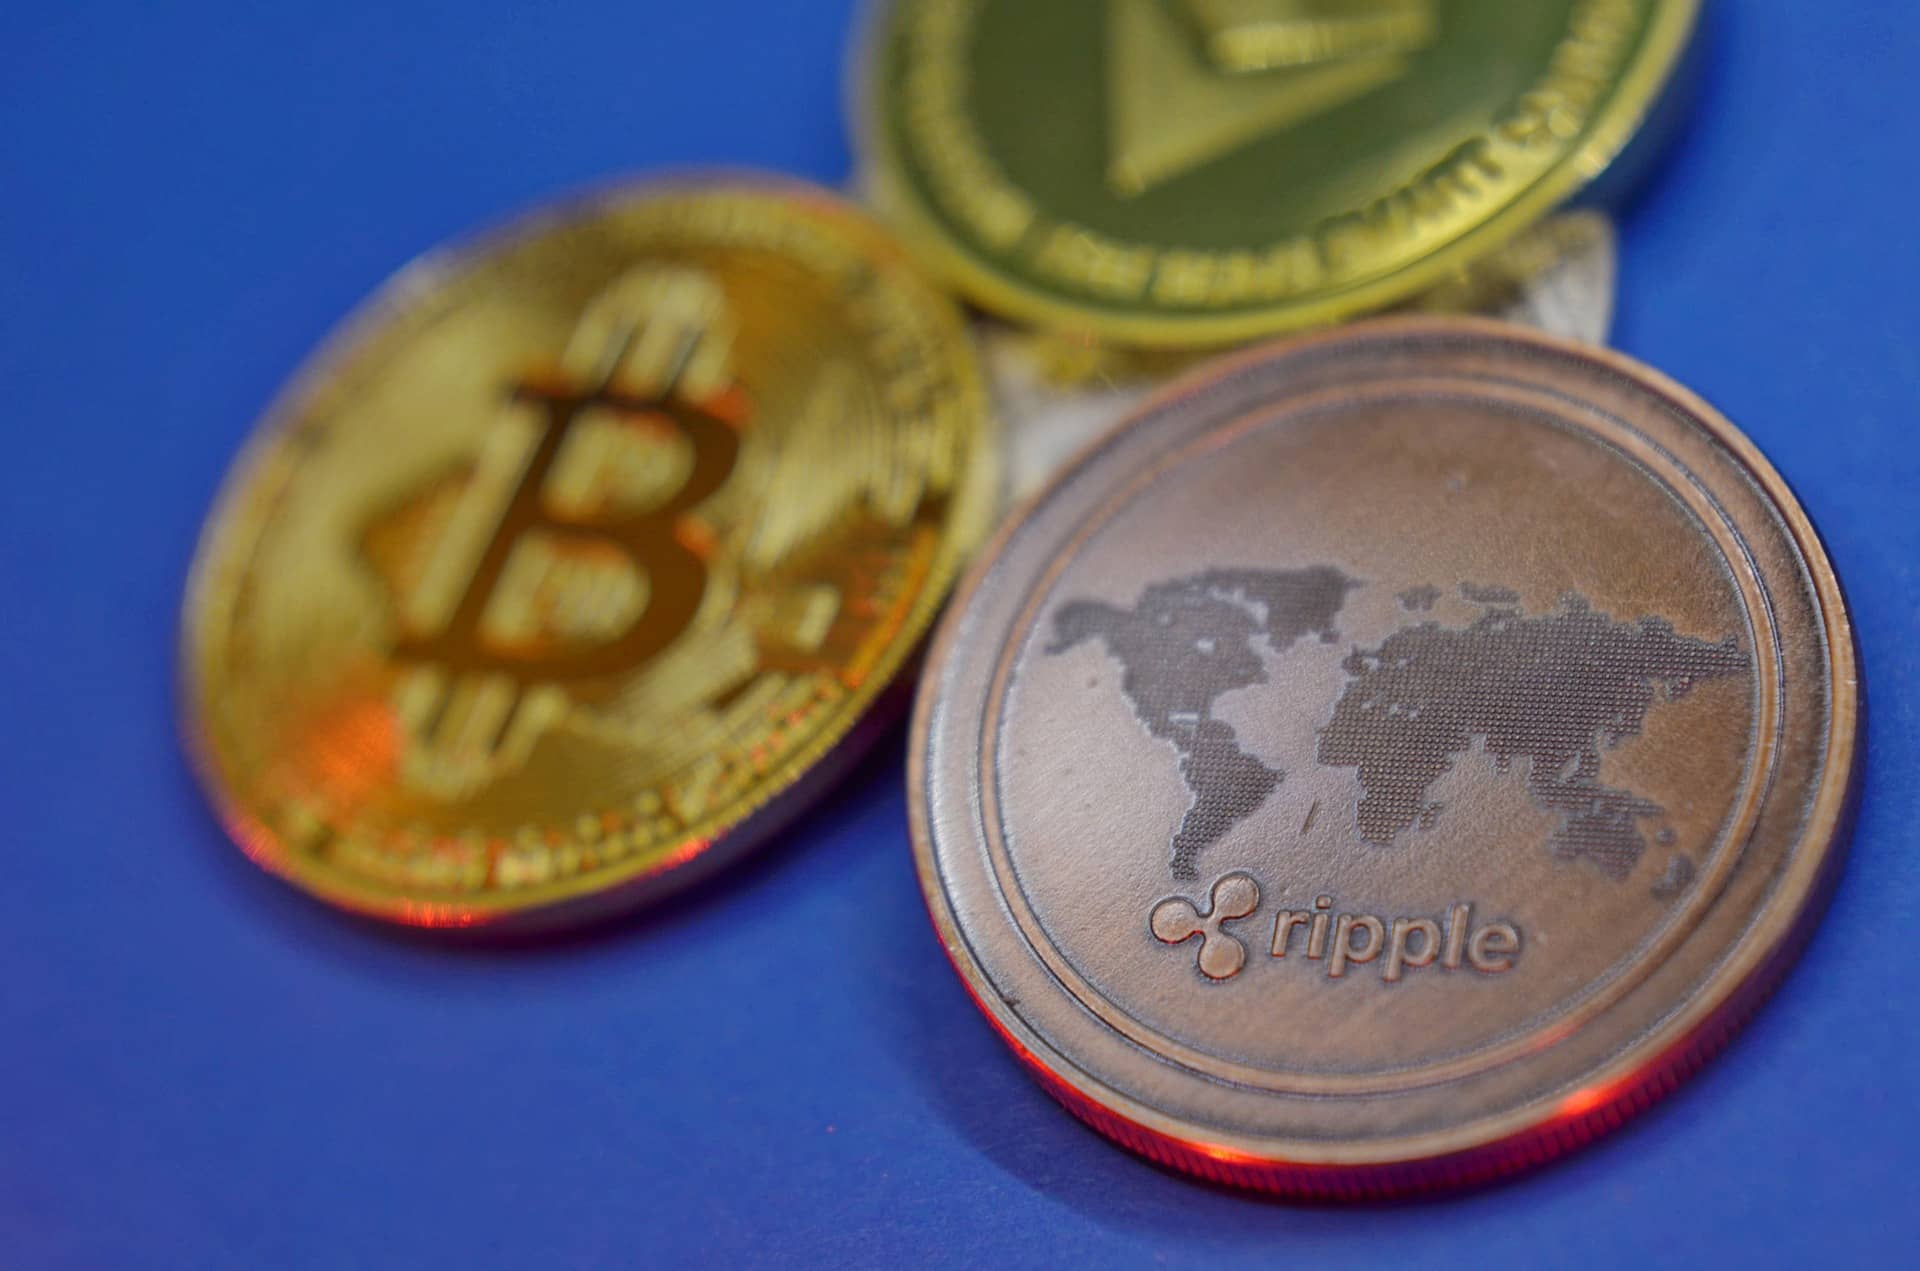 The CEO Of Ripple Says Bitcoin Tribalism Is Holding Back The Crypto Industry